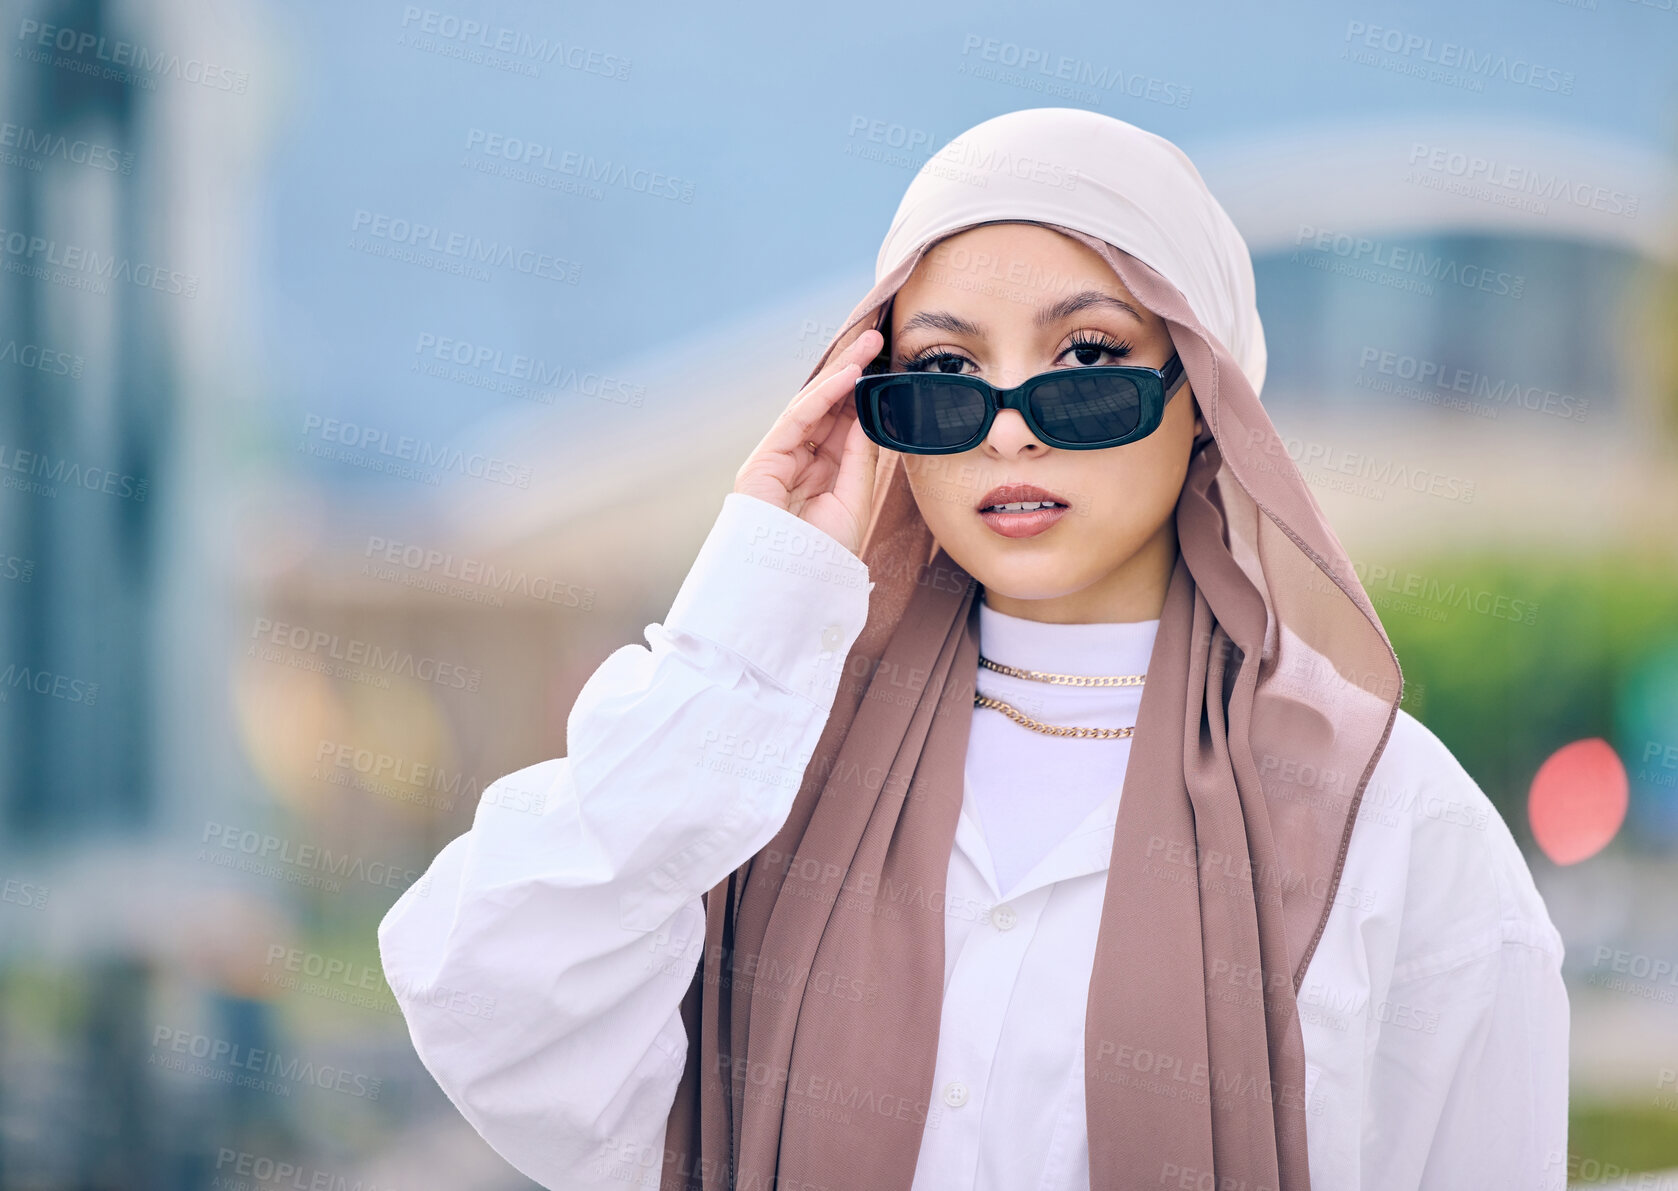 Buy stock photo Portrait, fashion or sunglasses with a muslim woman in saudi arabia wearing a cap and scarf for contemporary style. Islam, faith and hijab with a trendy young arab person posing outside in shades